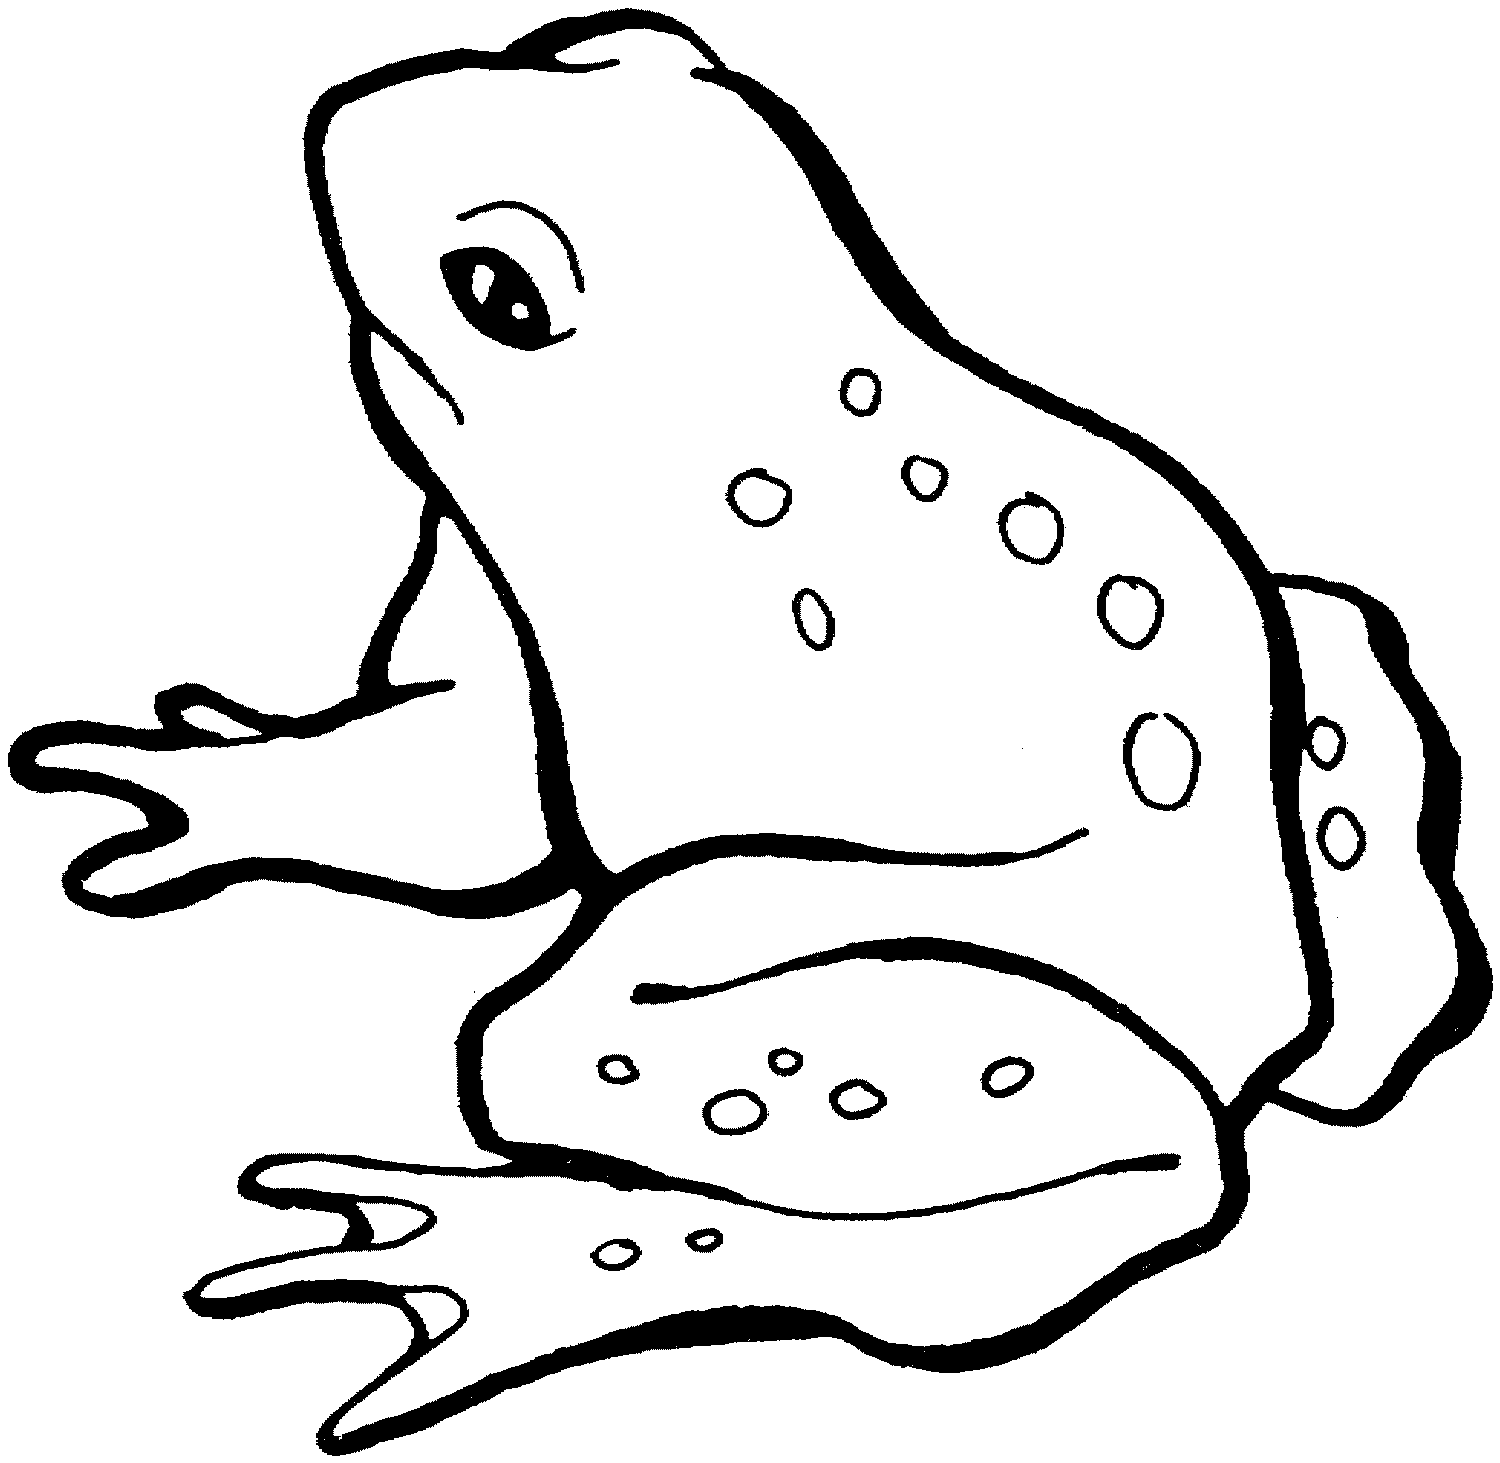 Black And White Frog Pictures - Clipart library